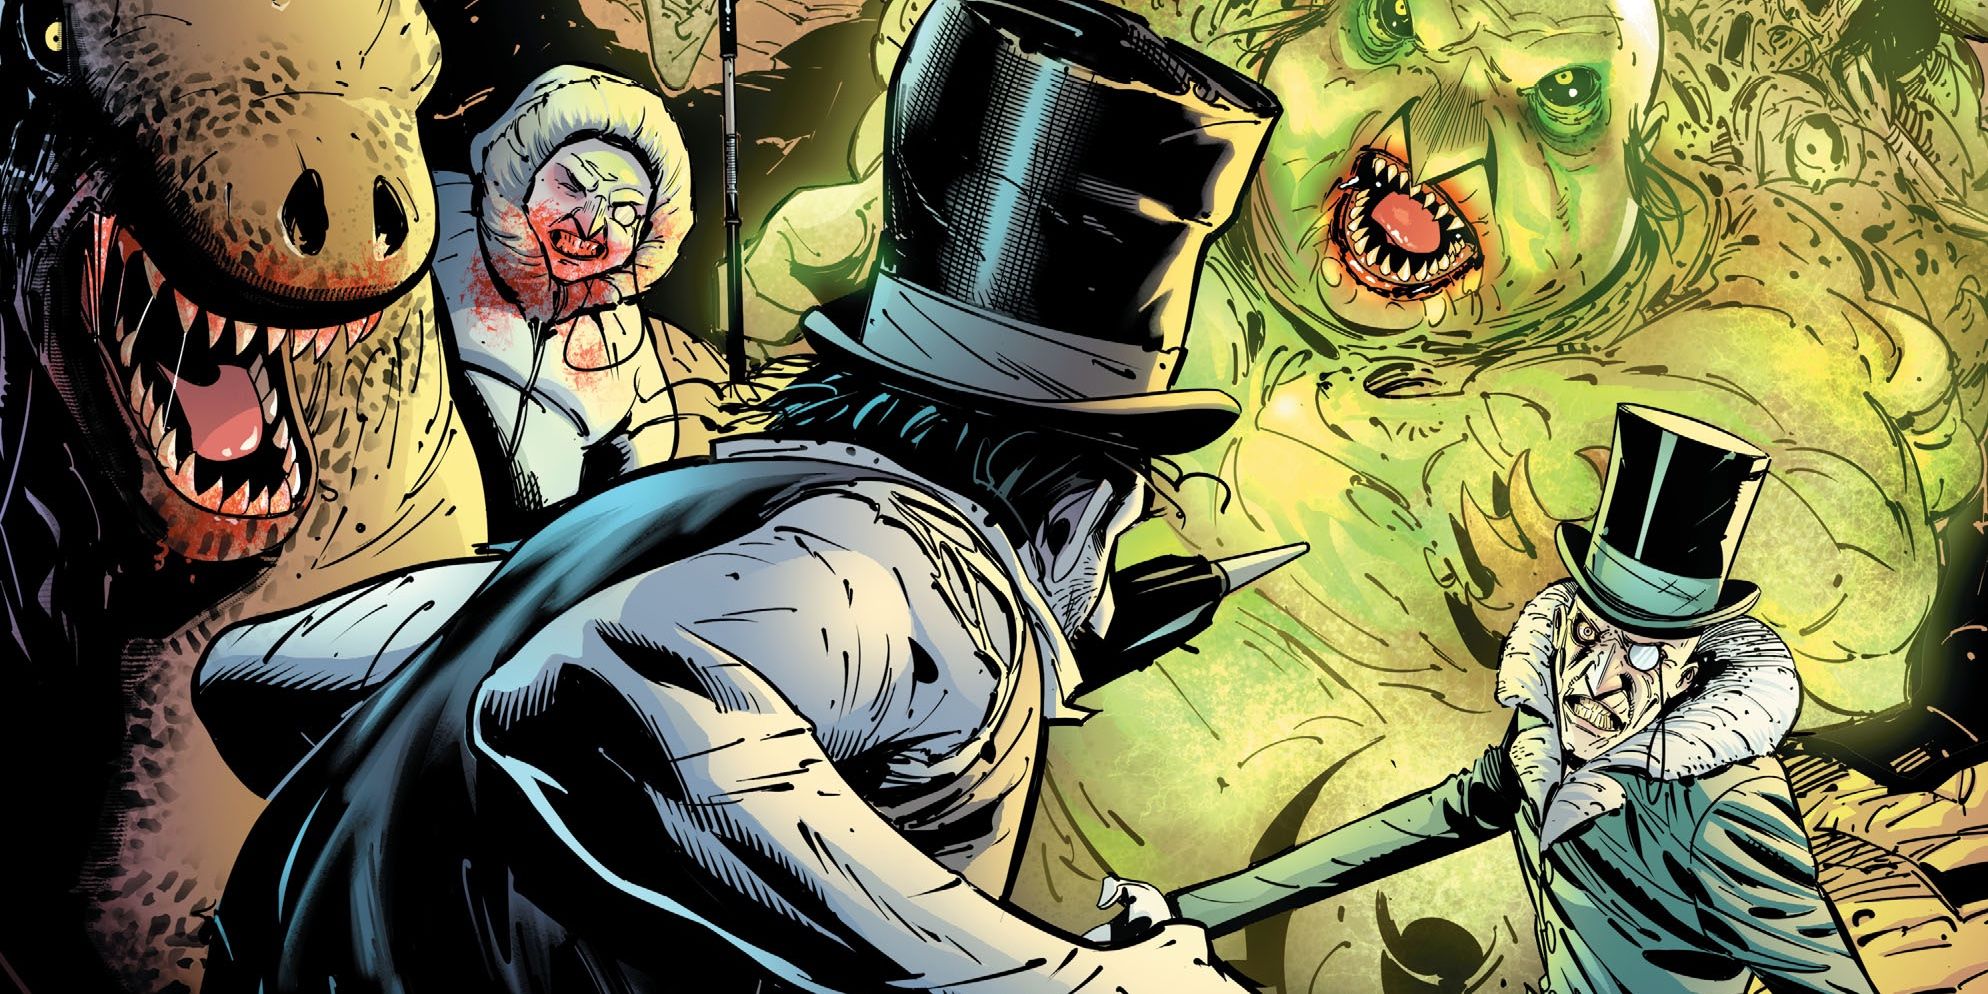 Batman: The Penguin's Ultimate Form is a Disgusting Monster